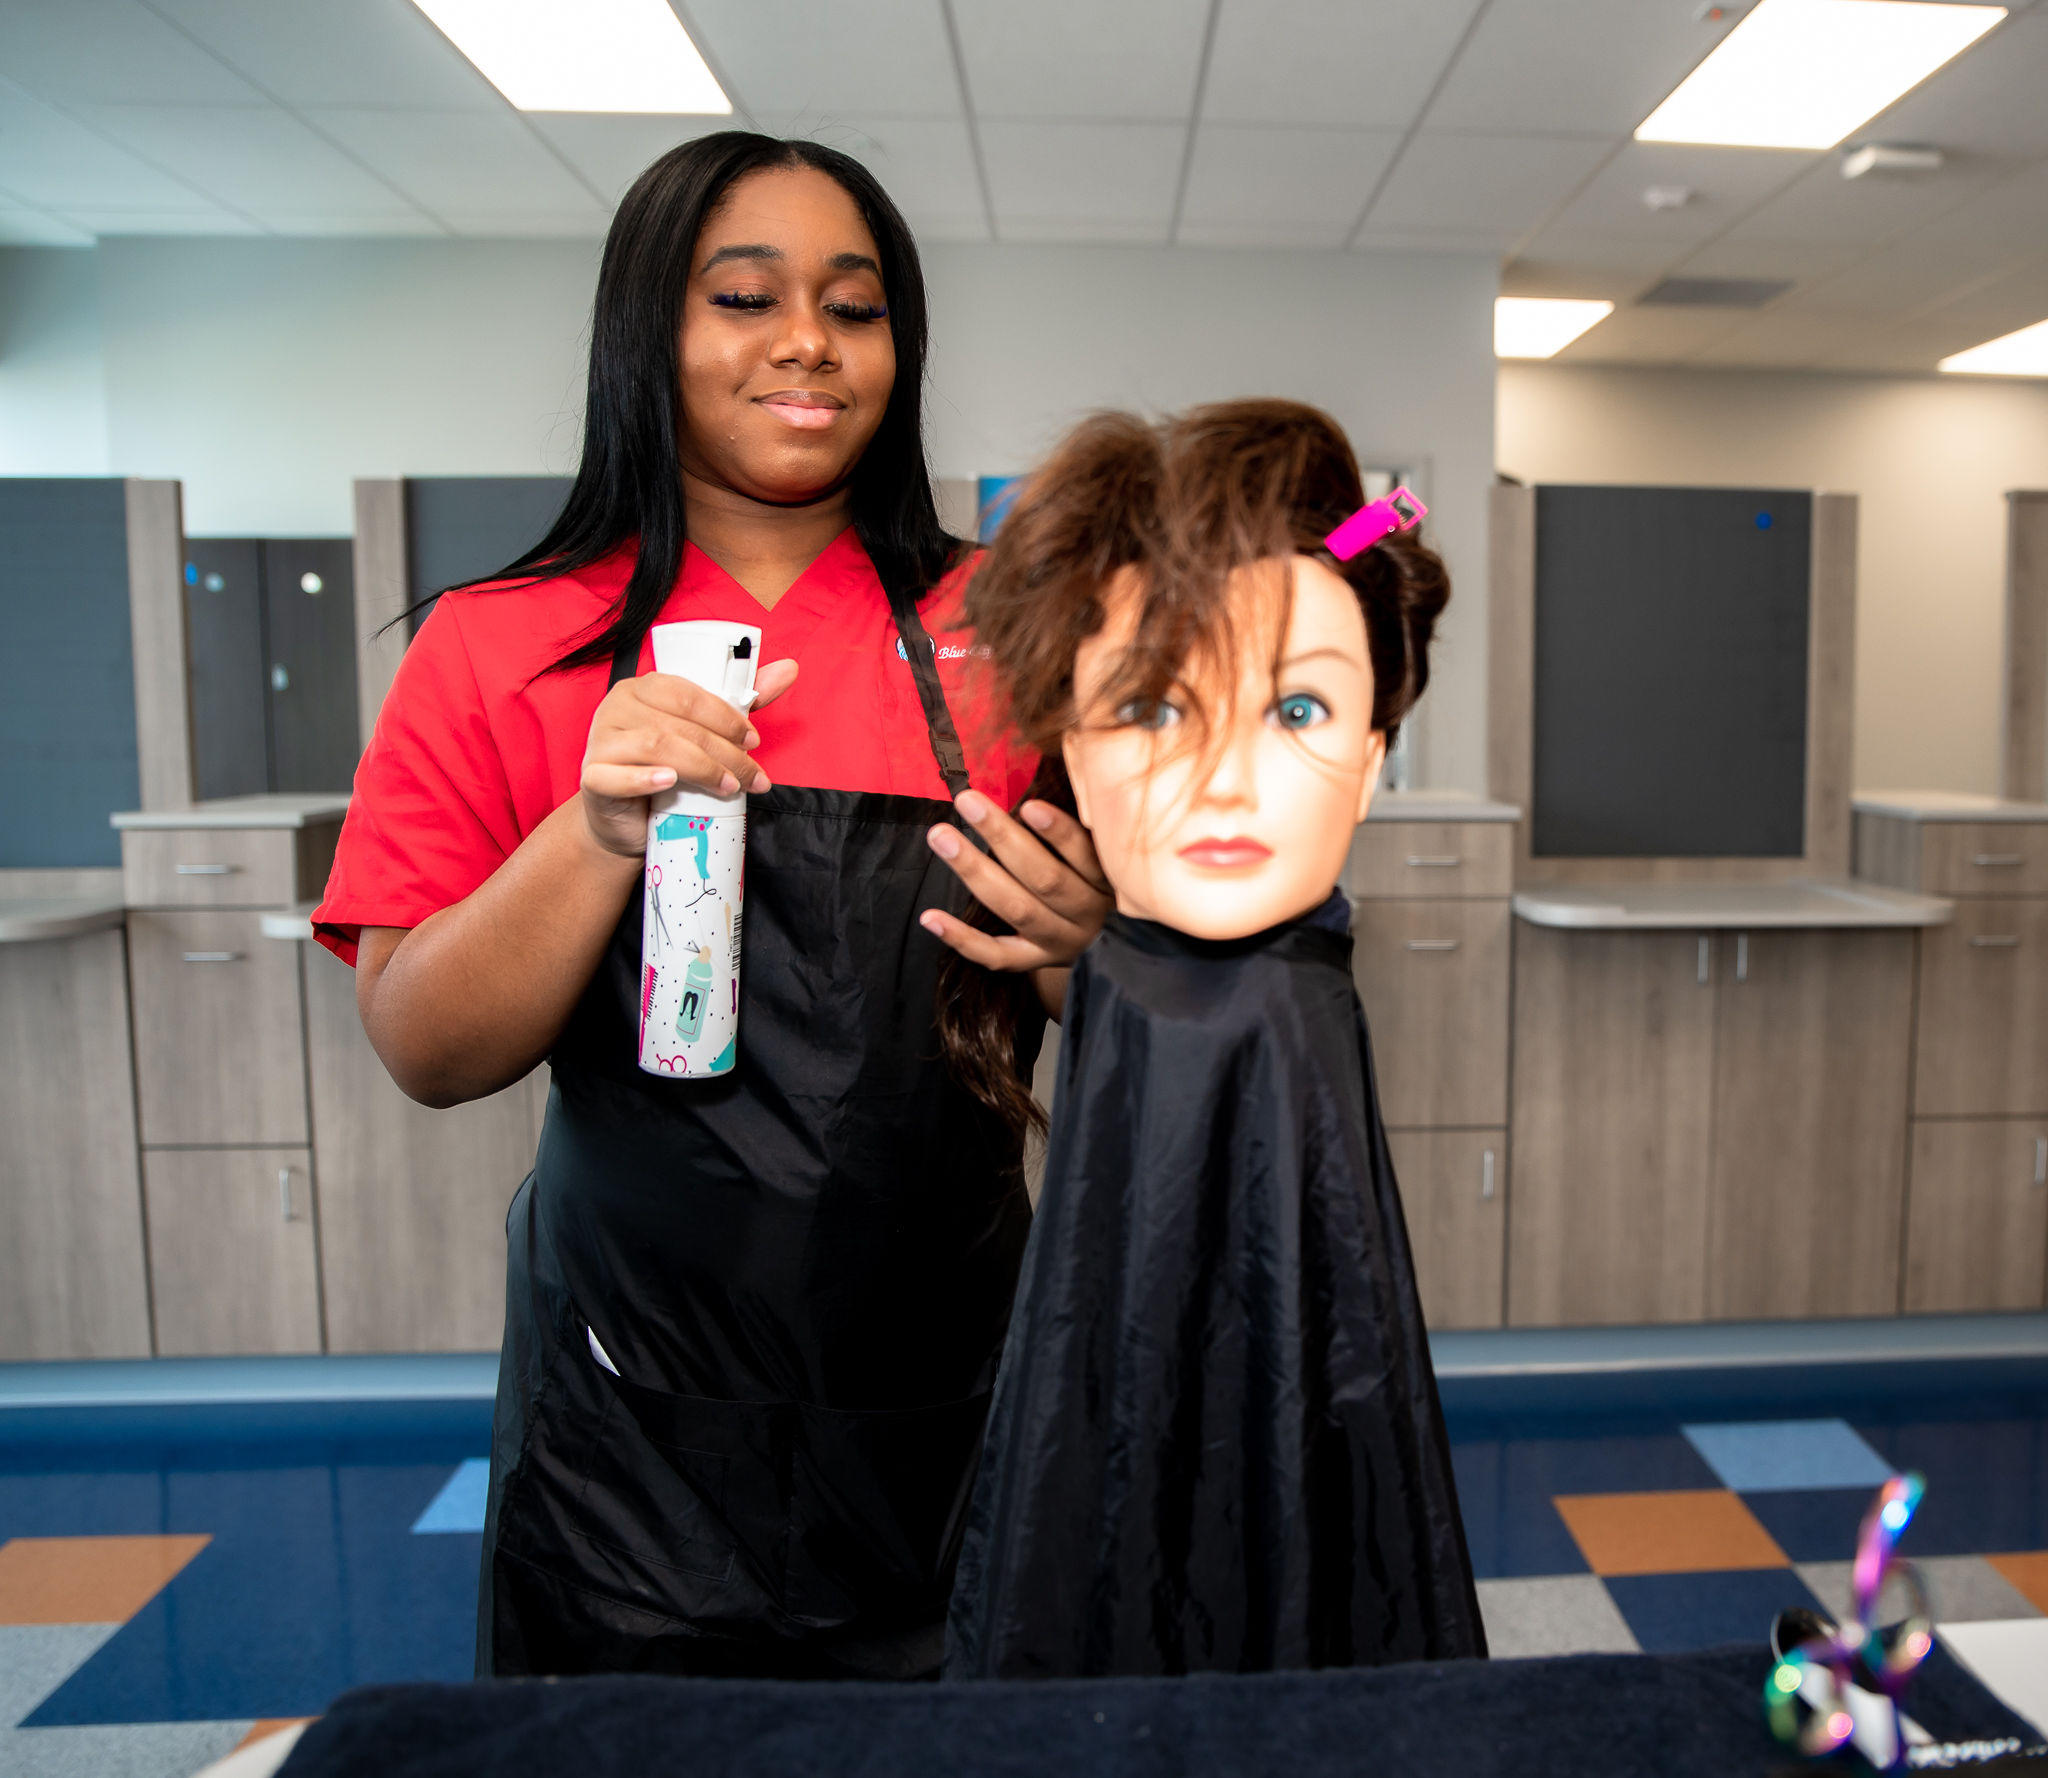 Through our hands-on training modules and industry-current classes taught by experienced instructors, you could take your cosmetology skills to the next level. Our simulated student salons will give you hands-on training in hair, nails, skin, multicultural techniques, hair cutting and coloring, and makeup techniques.